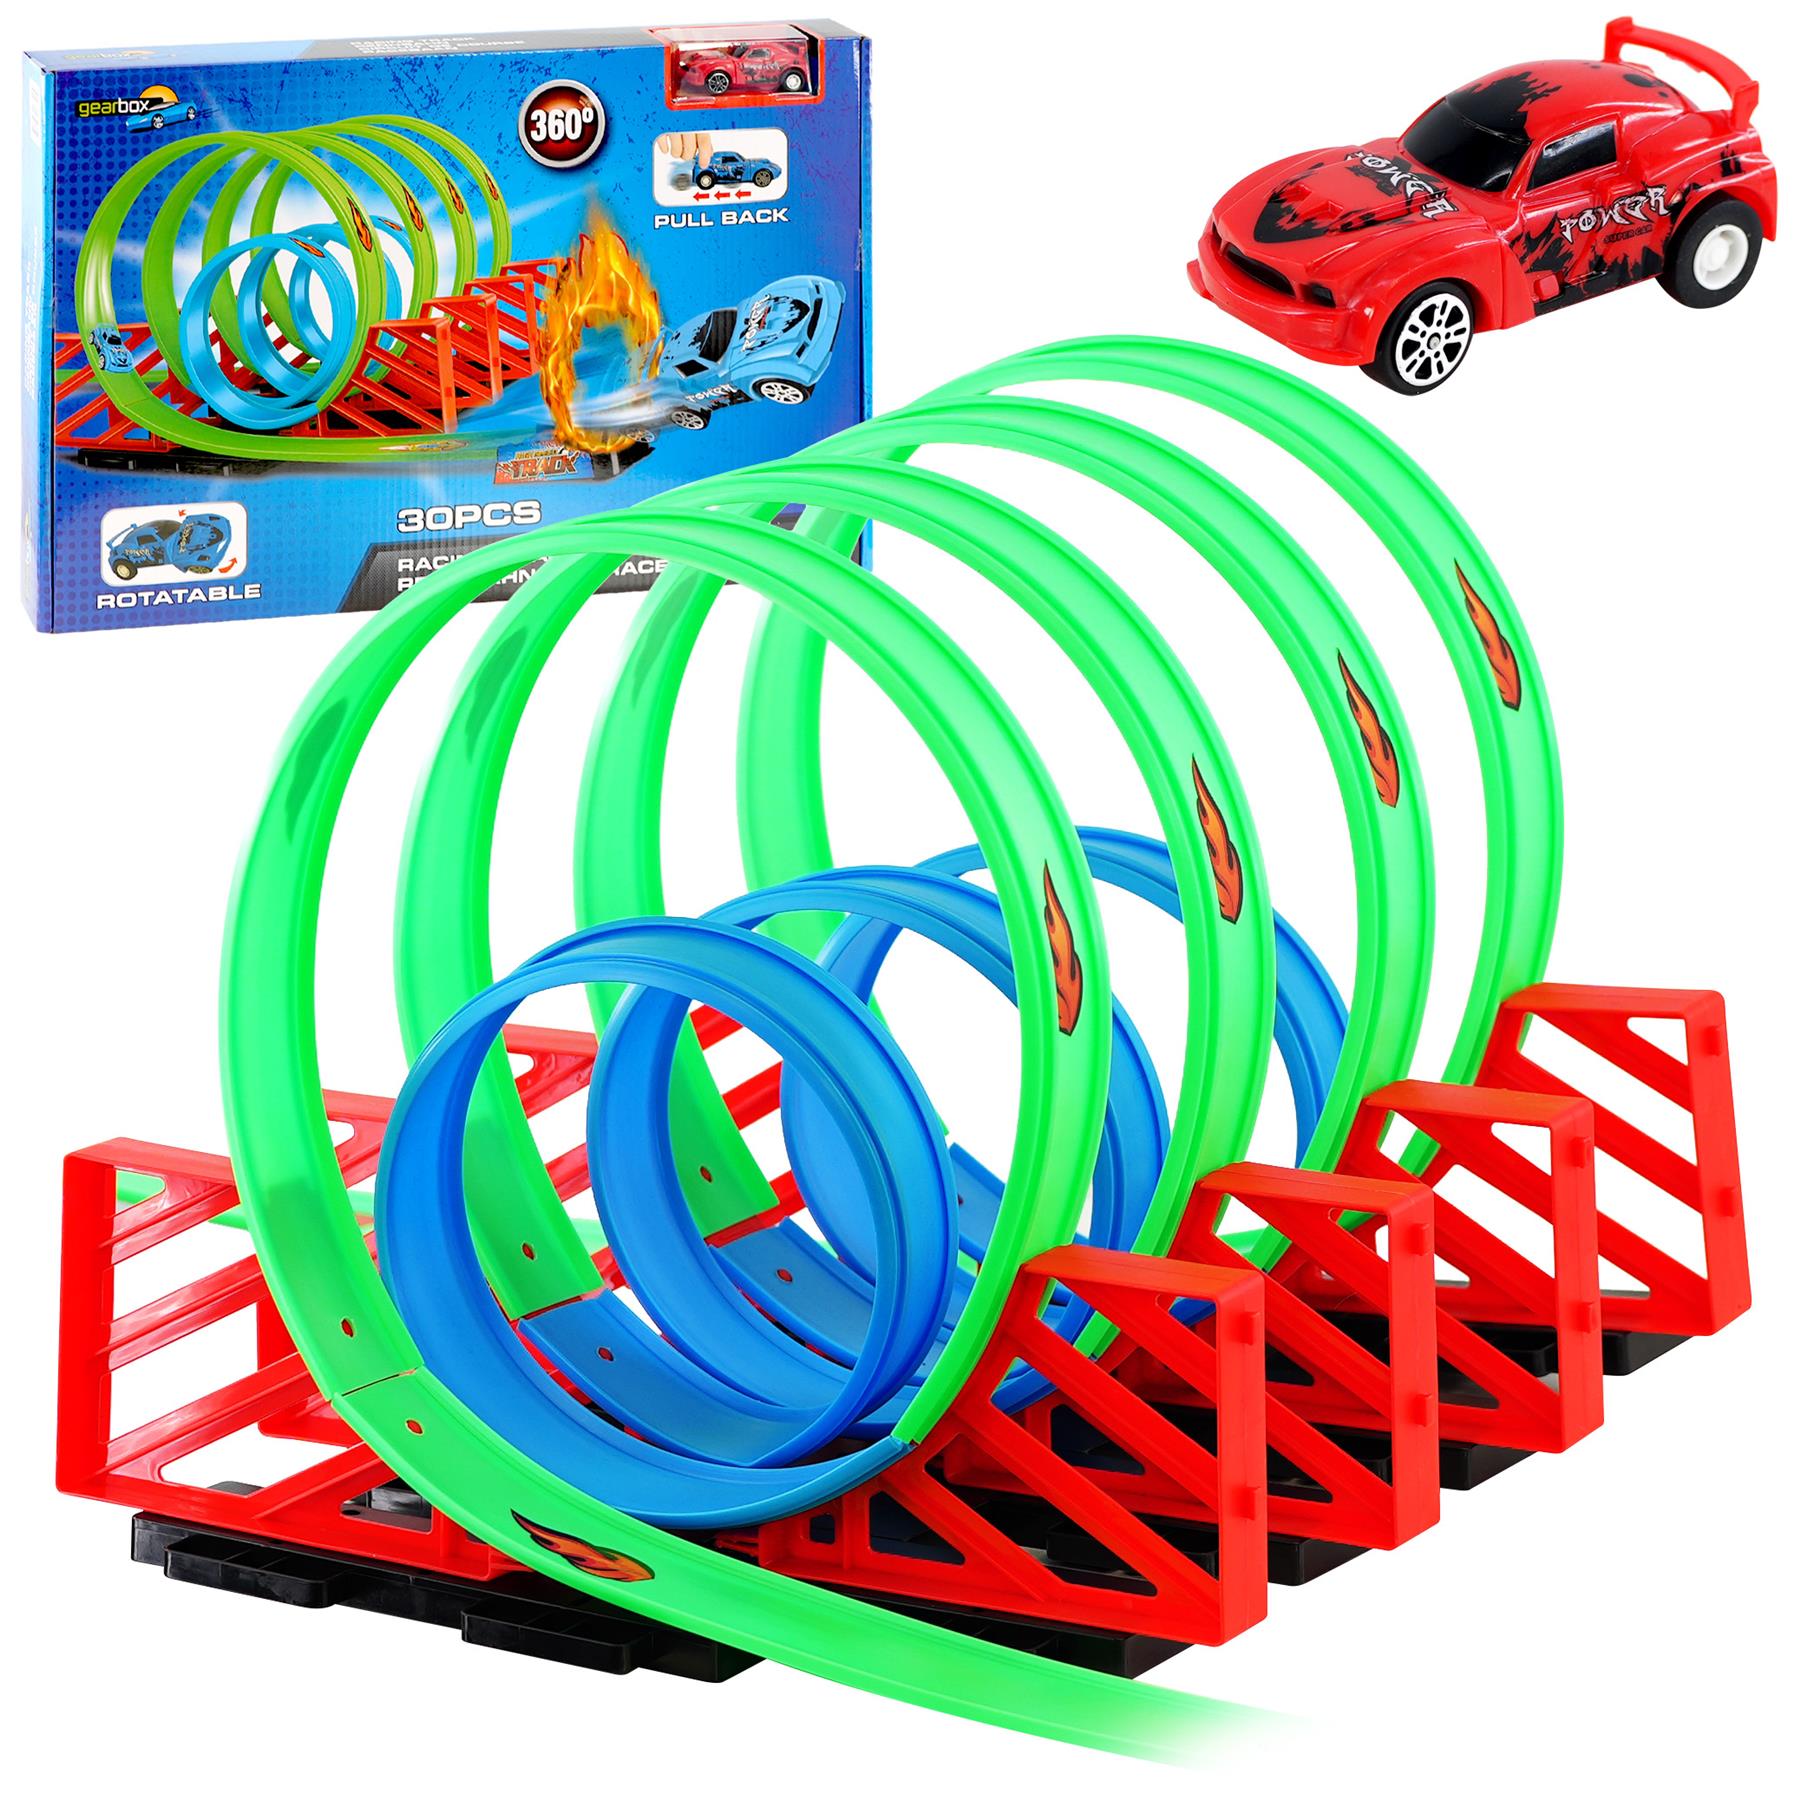 Racing Track 360° with Toy Car